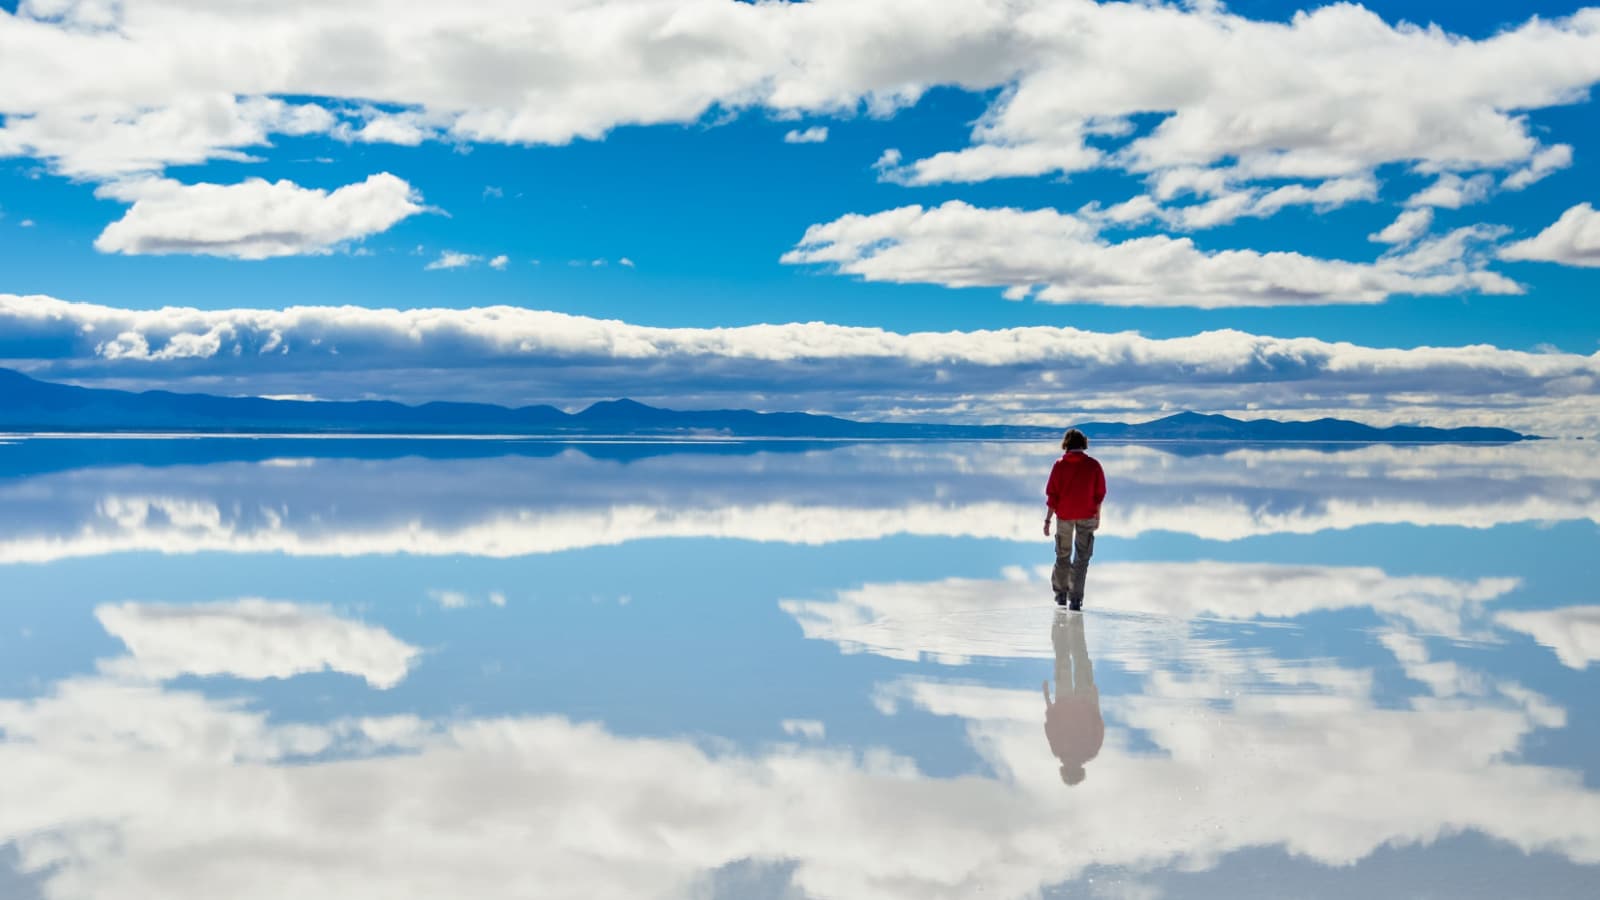 Girl in red on Salar de Uyuni in Bolivia covered with water with cloudy sky reflections